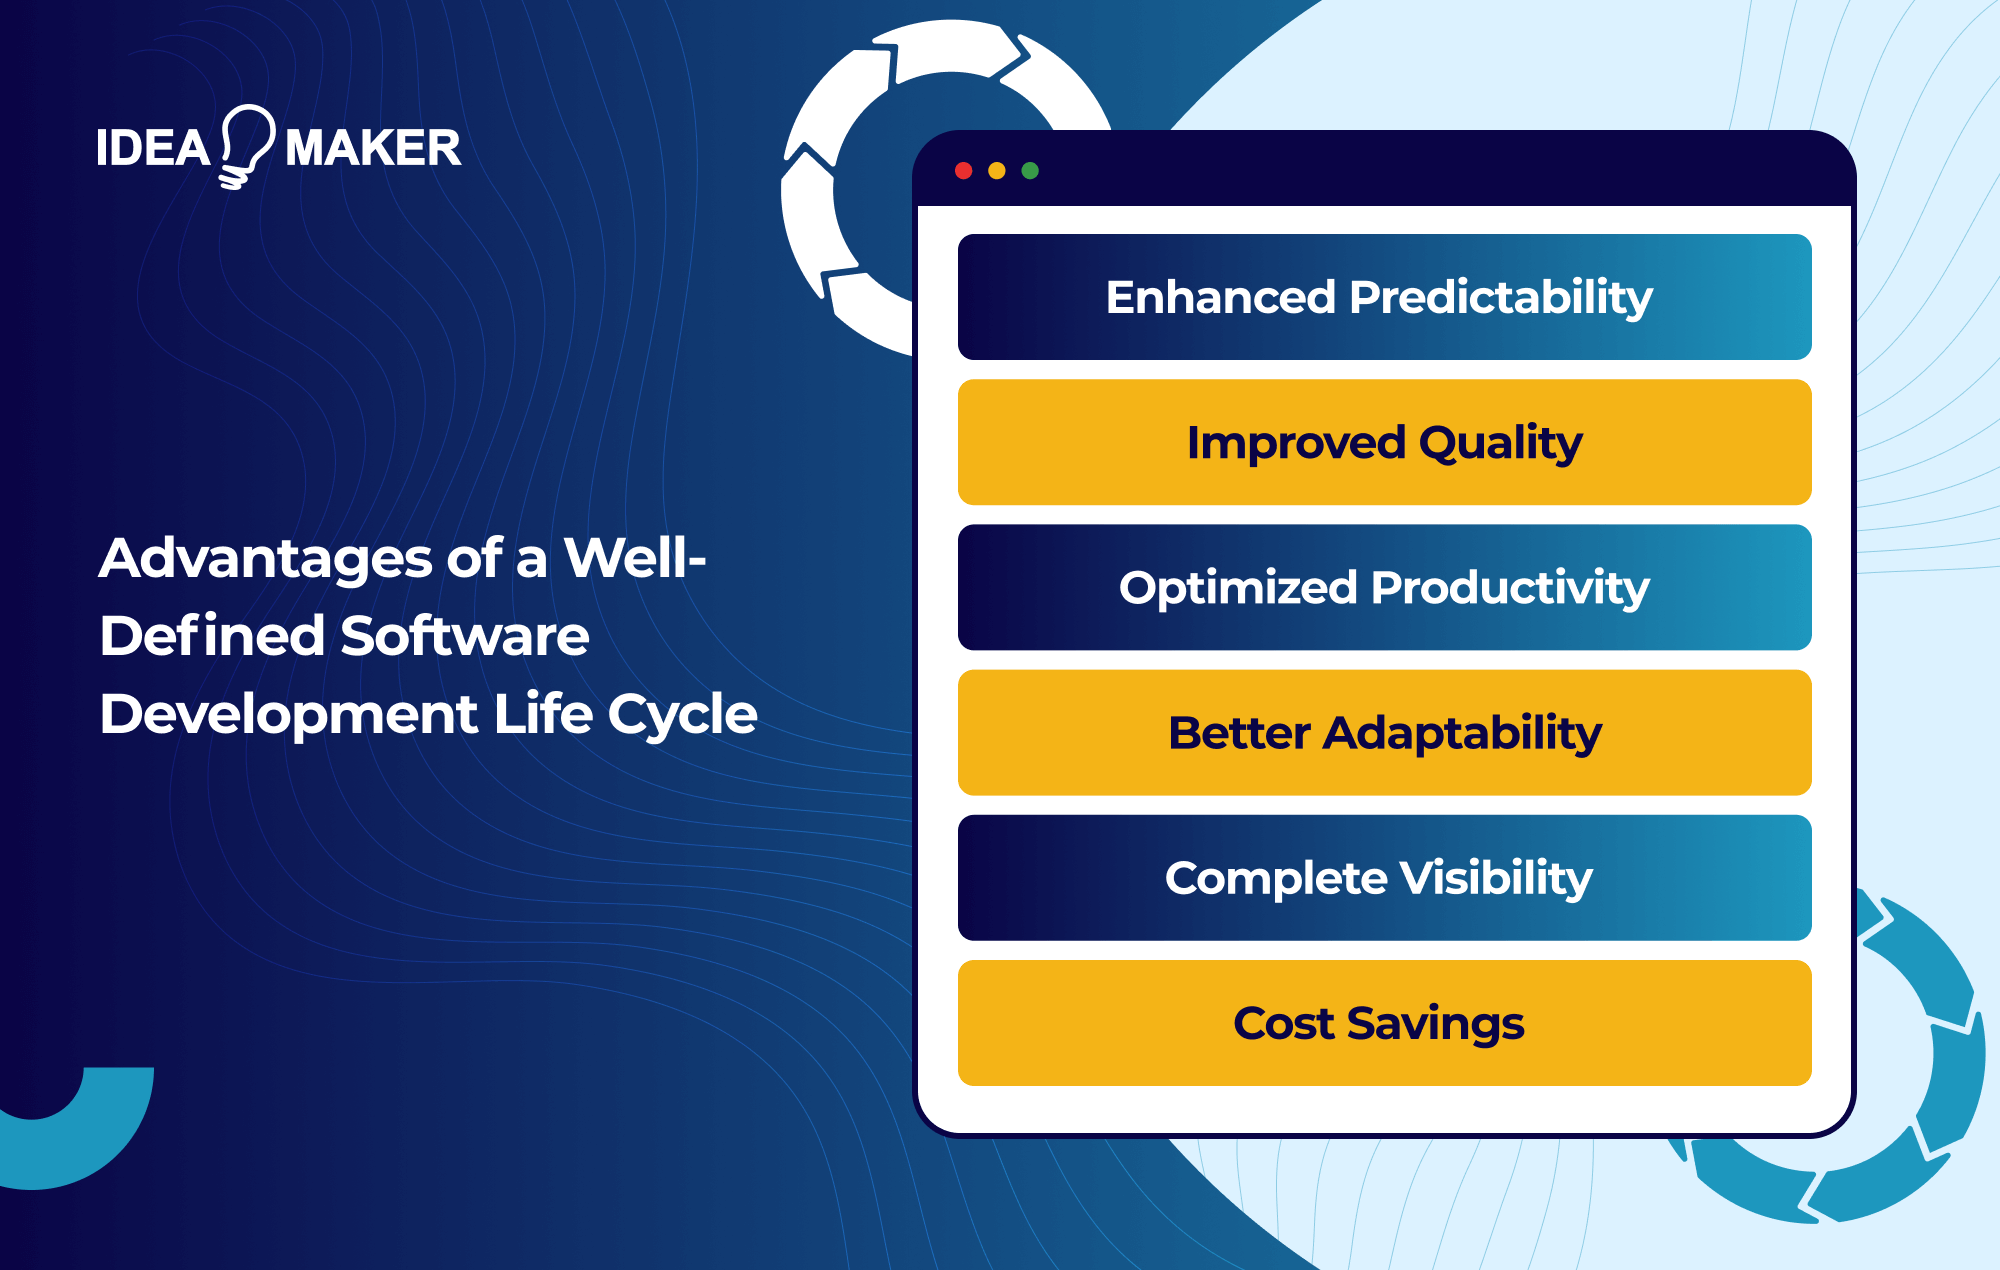 Ideamaker - Advantages of a Well-Defined Software Development Life Cycle